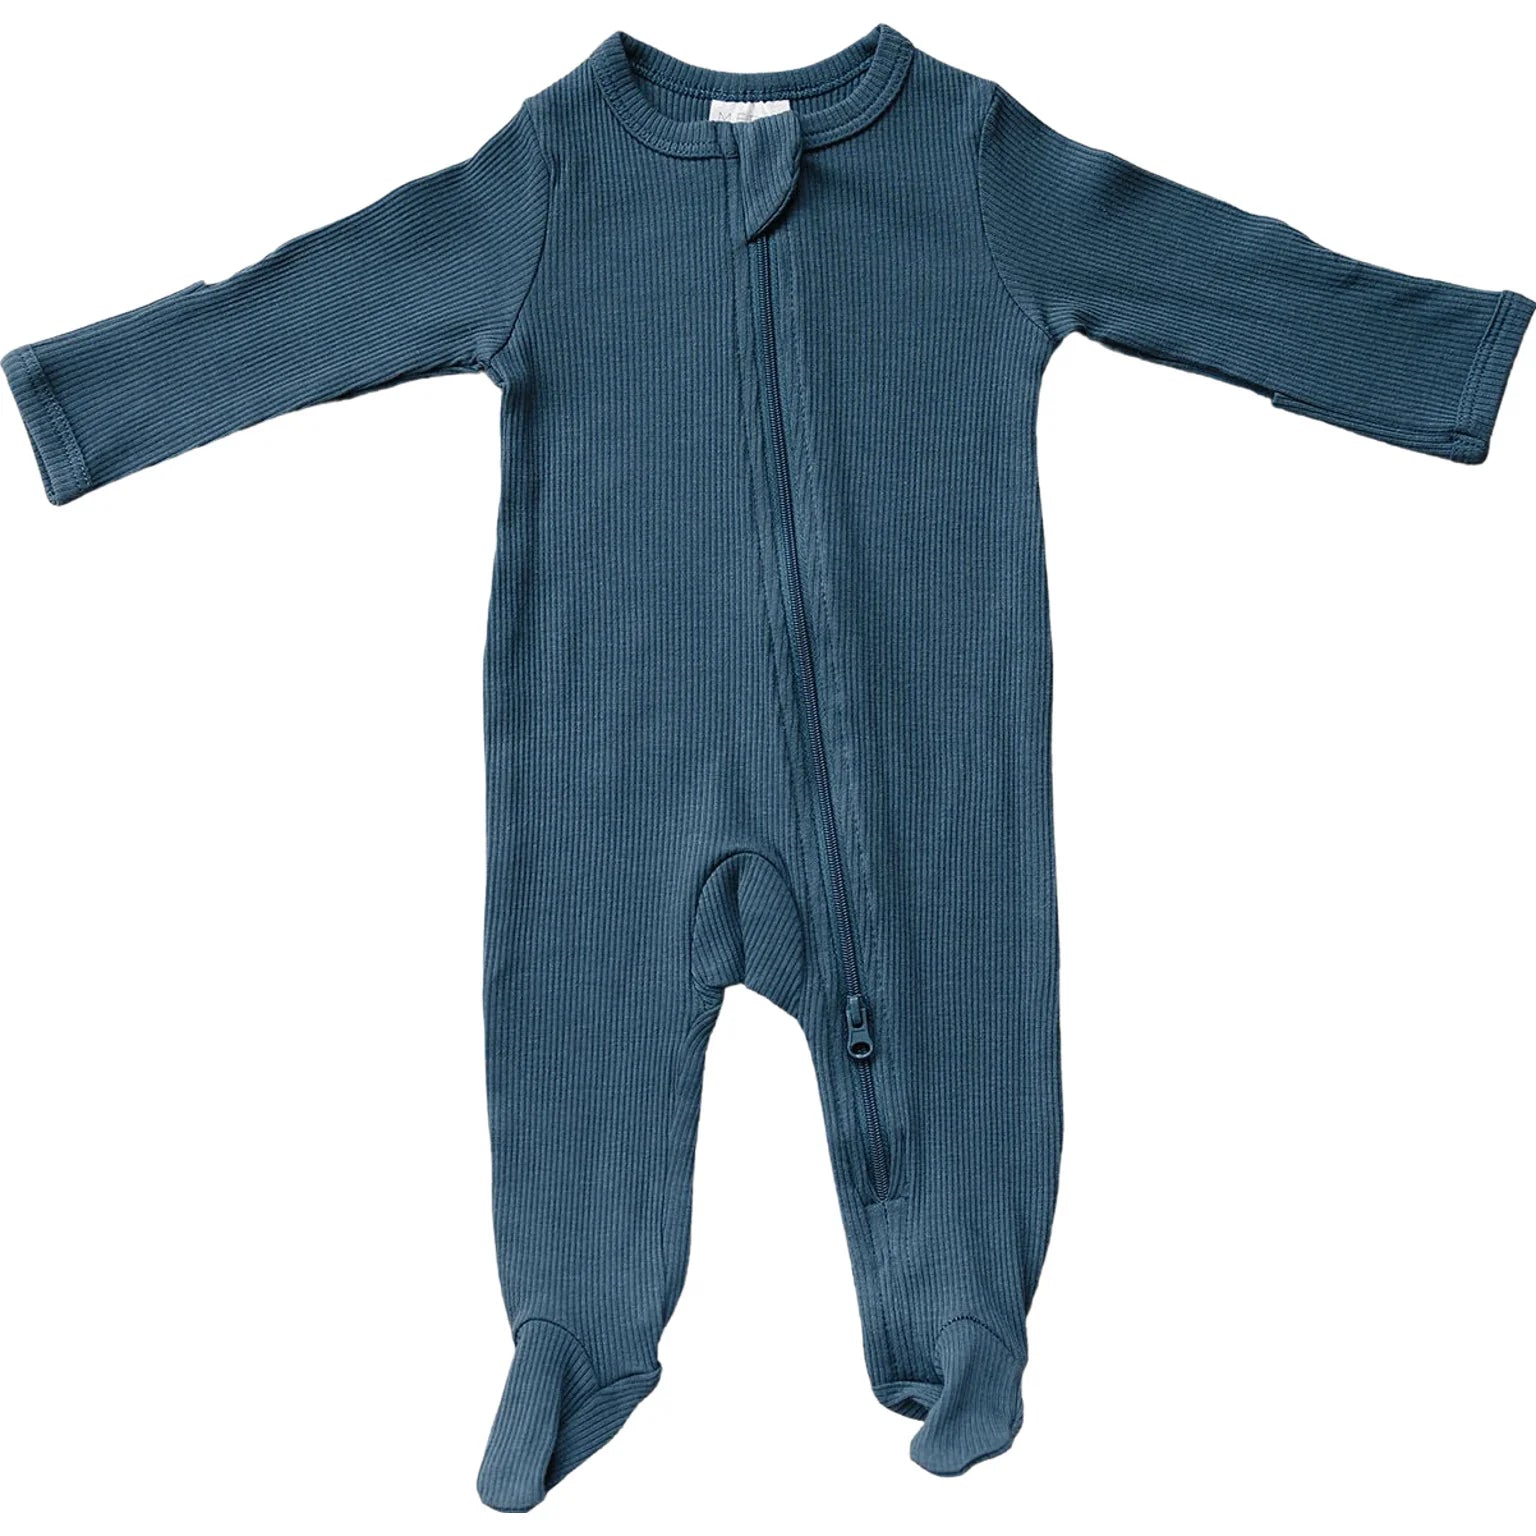 Mebie Baby - Navy Organic Cotton Ribbed Zipper Footed Sleeper